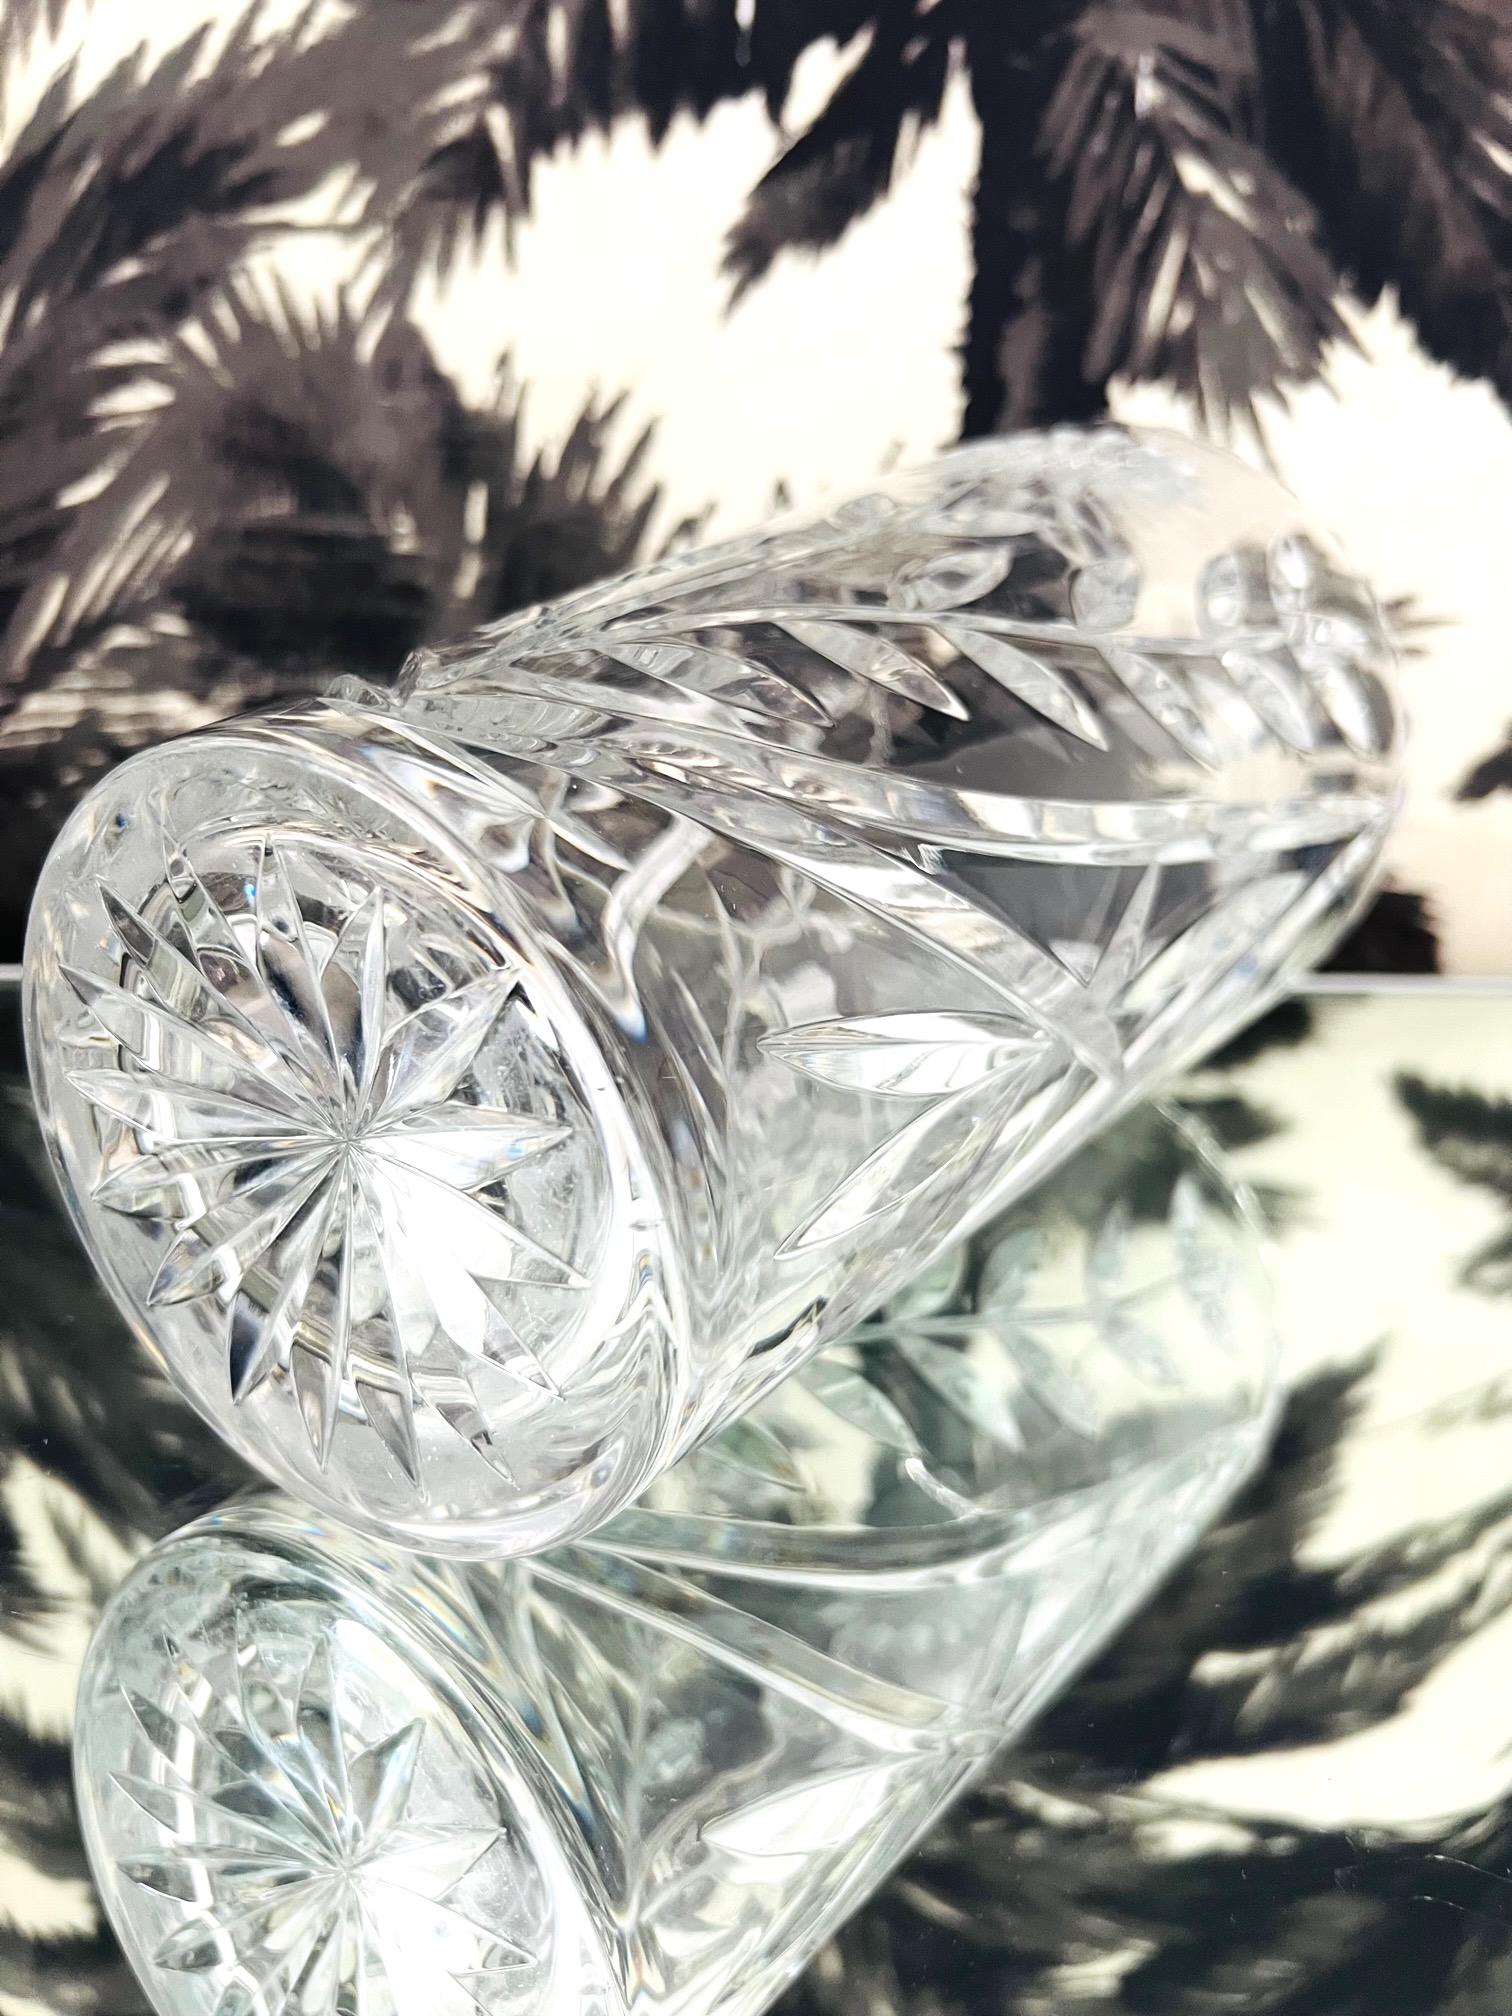 Waterford Crystal Etched Sunflower Vase with Cut Glass Designs, England, c. 2010 For Sale 1